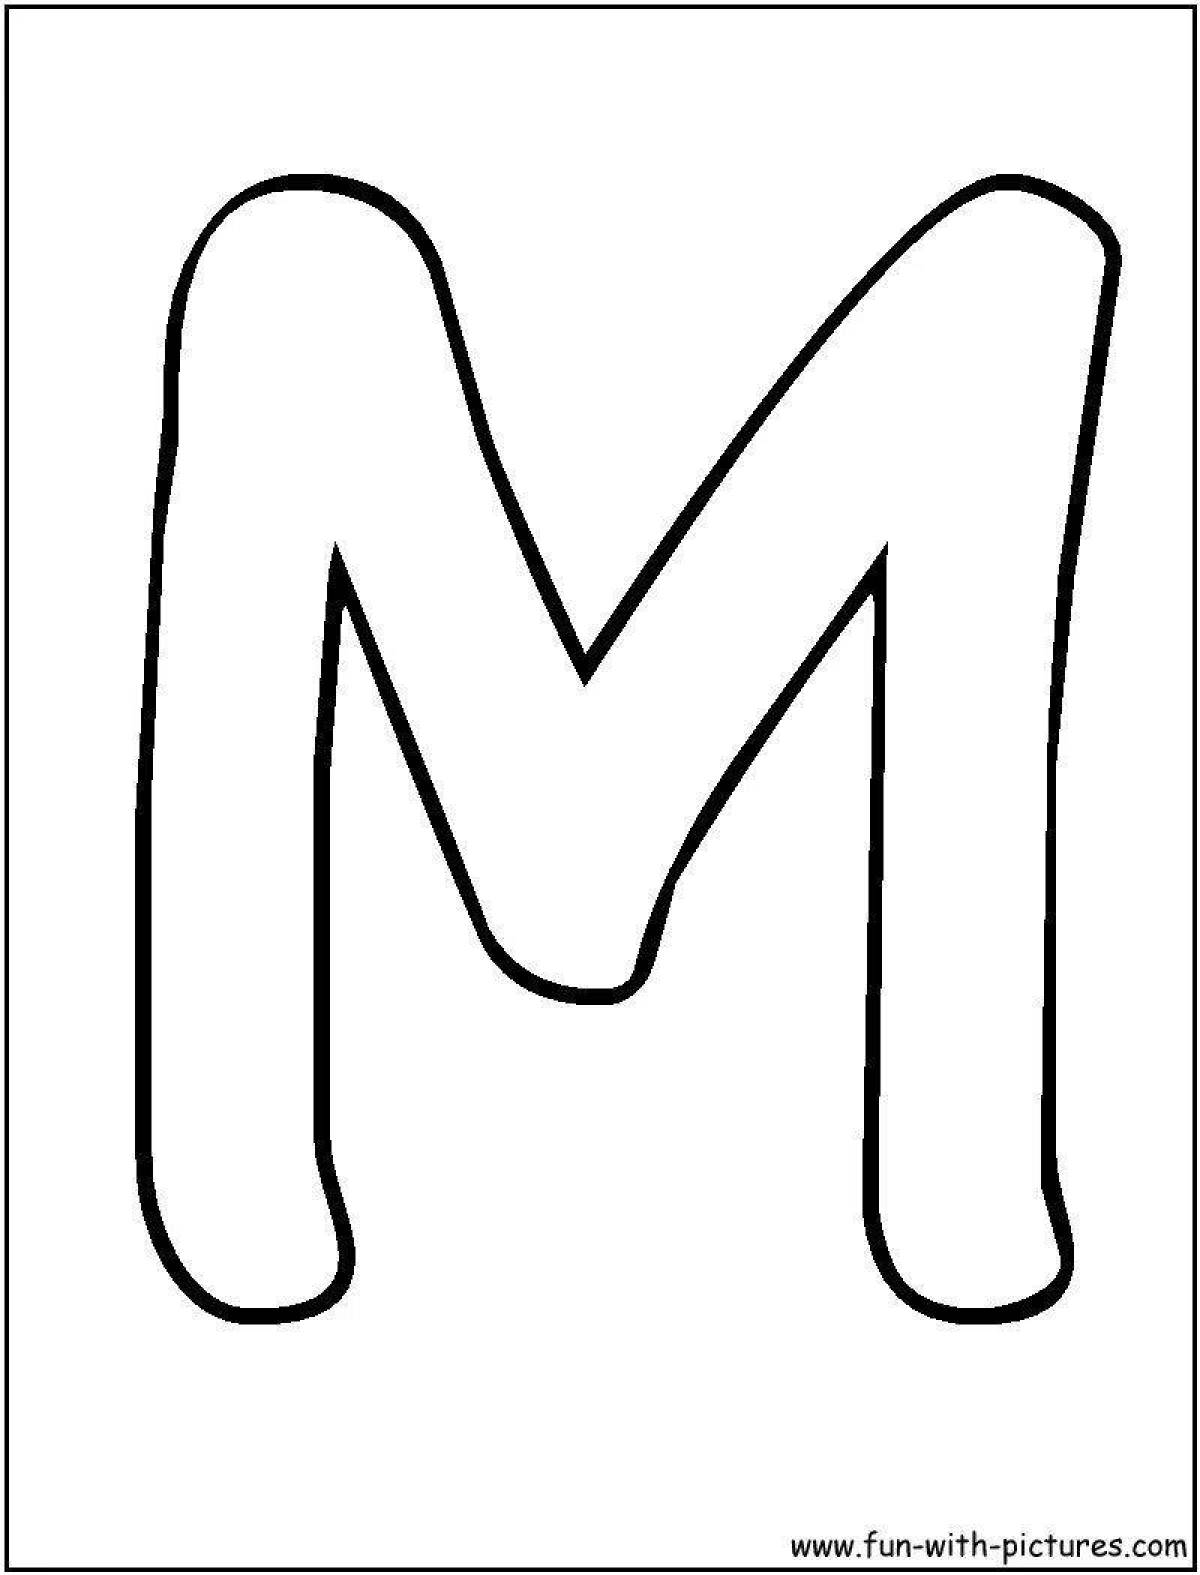 Fun coloring page и n m t